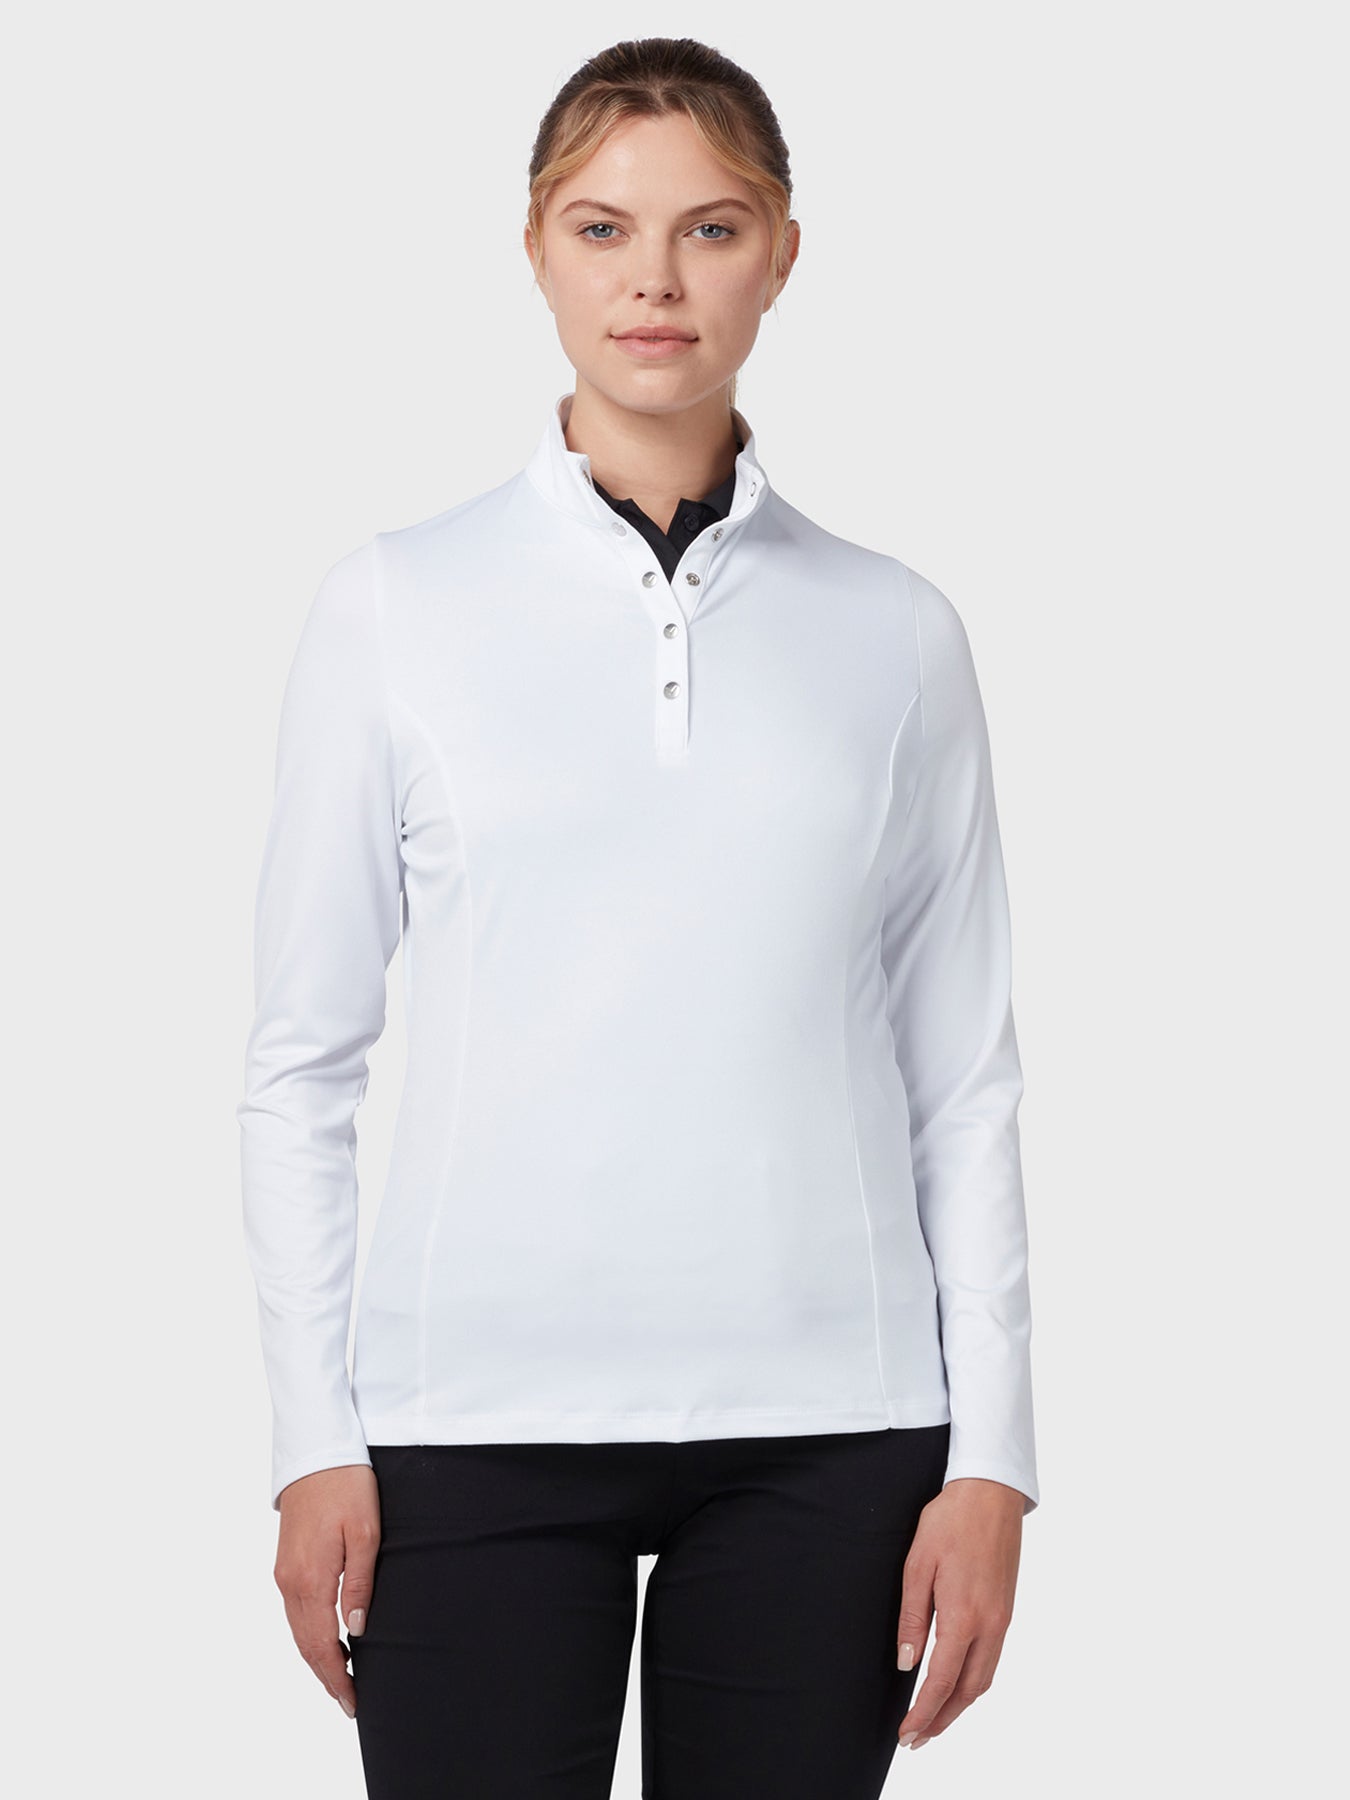 View Womens Thermal Longsleeve Fleece Back Jersey Polo In Brilliant White Brilliant White XS information